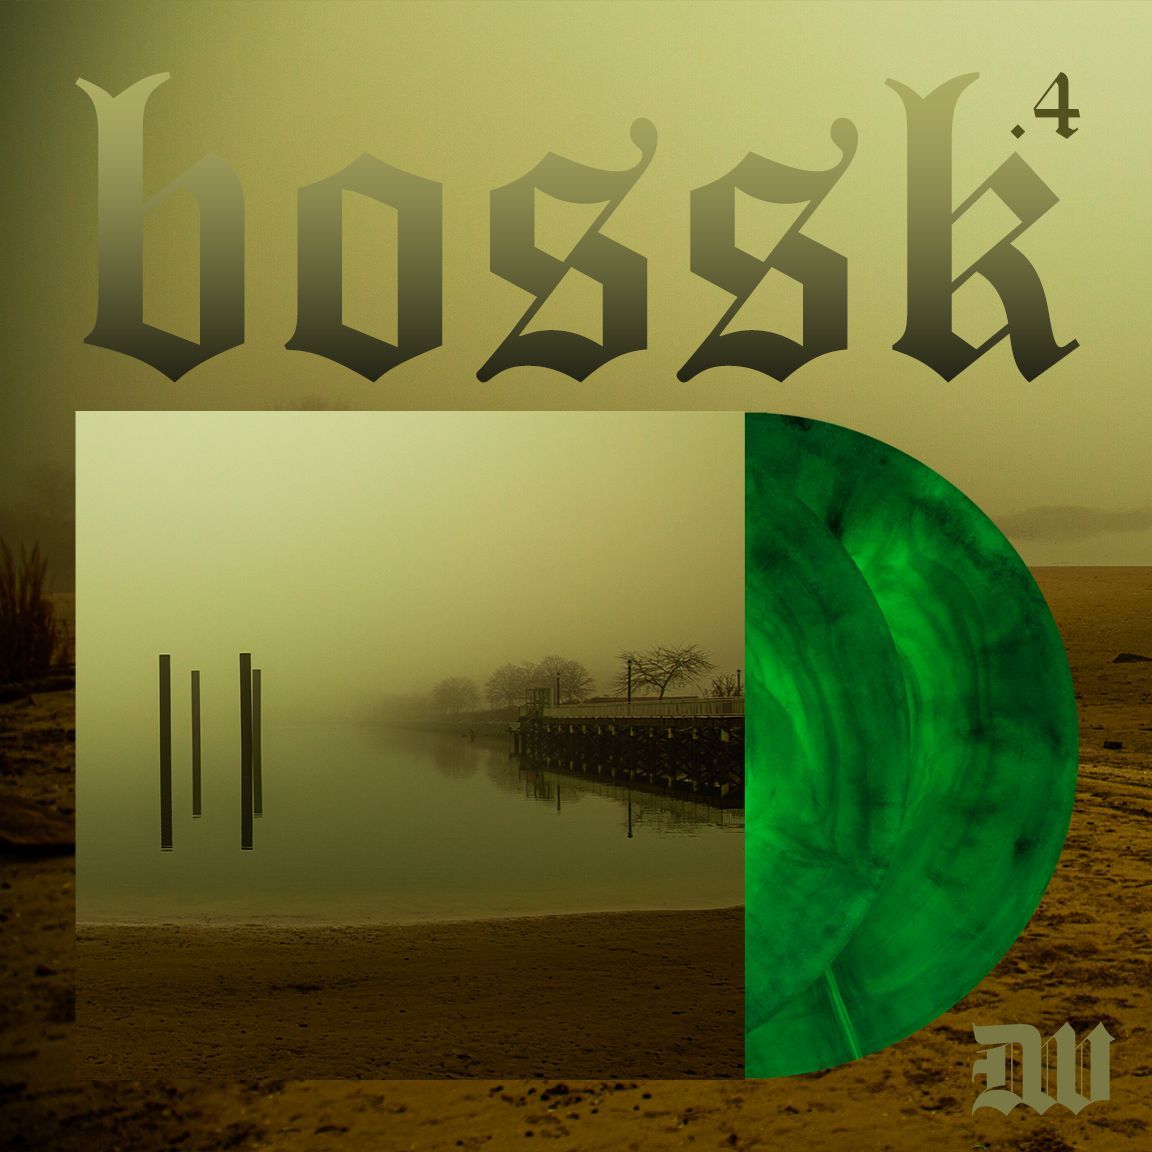 Bossk '.4' in stores worldwide on May 10th  
Listen to 'Truth II' & Pre-order now → bossk.org  

#Bossk #DeathwishInc #DeathwishEurope #ShoeGaze #PostMetal